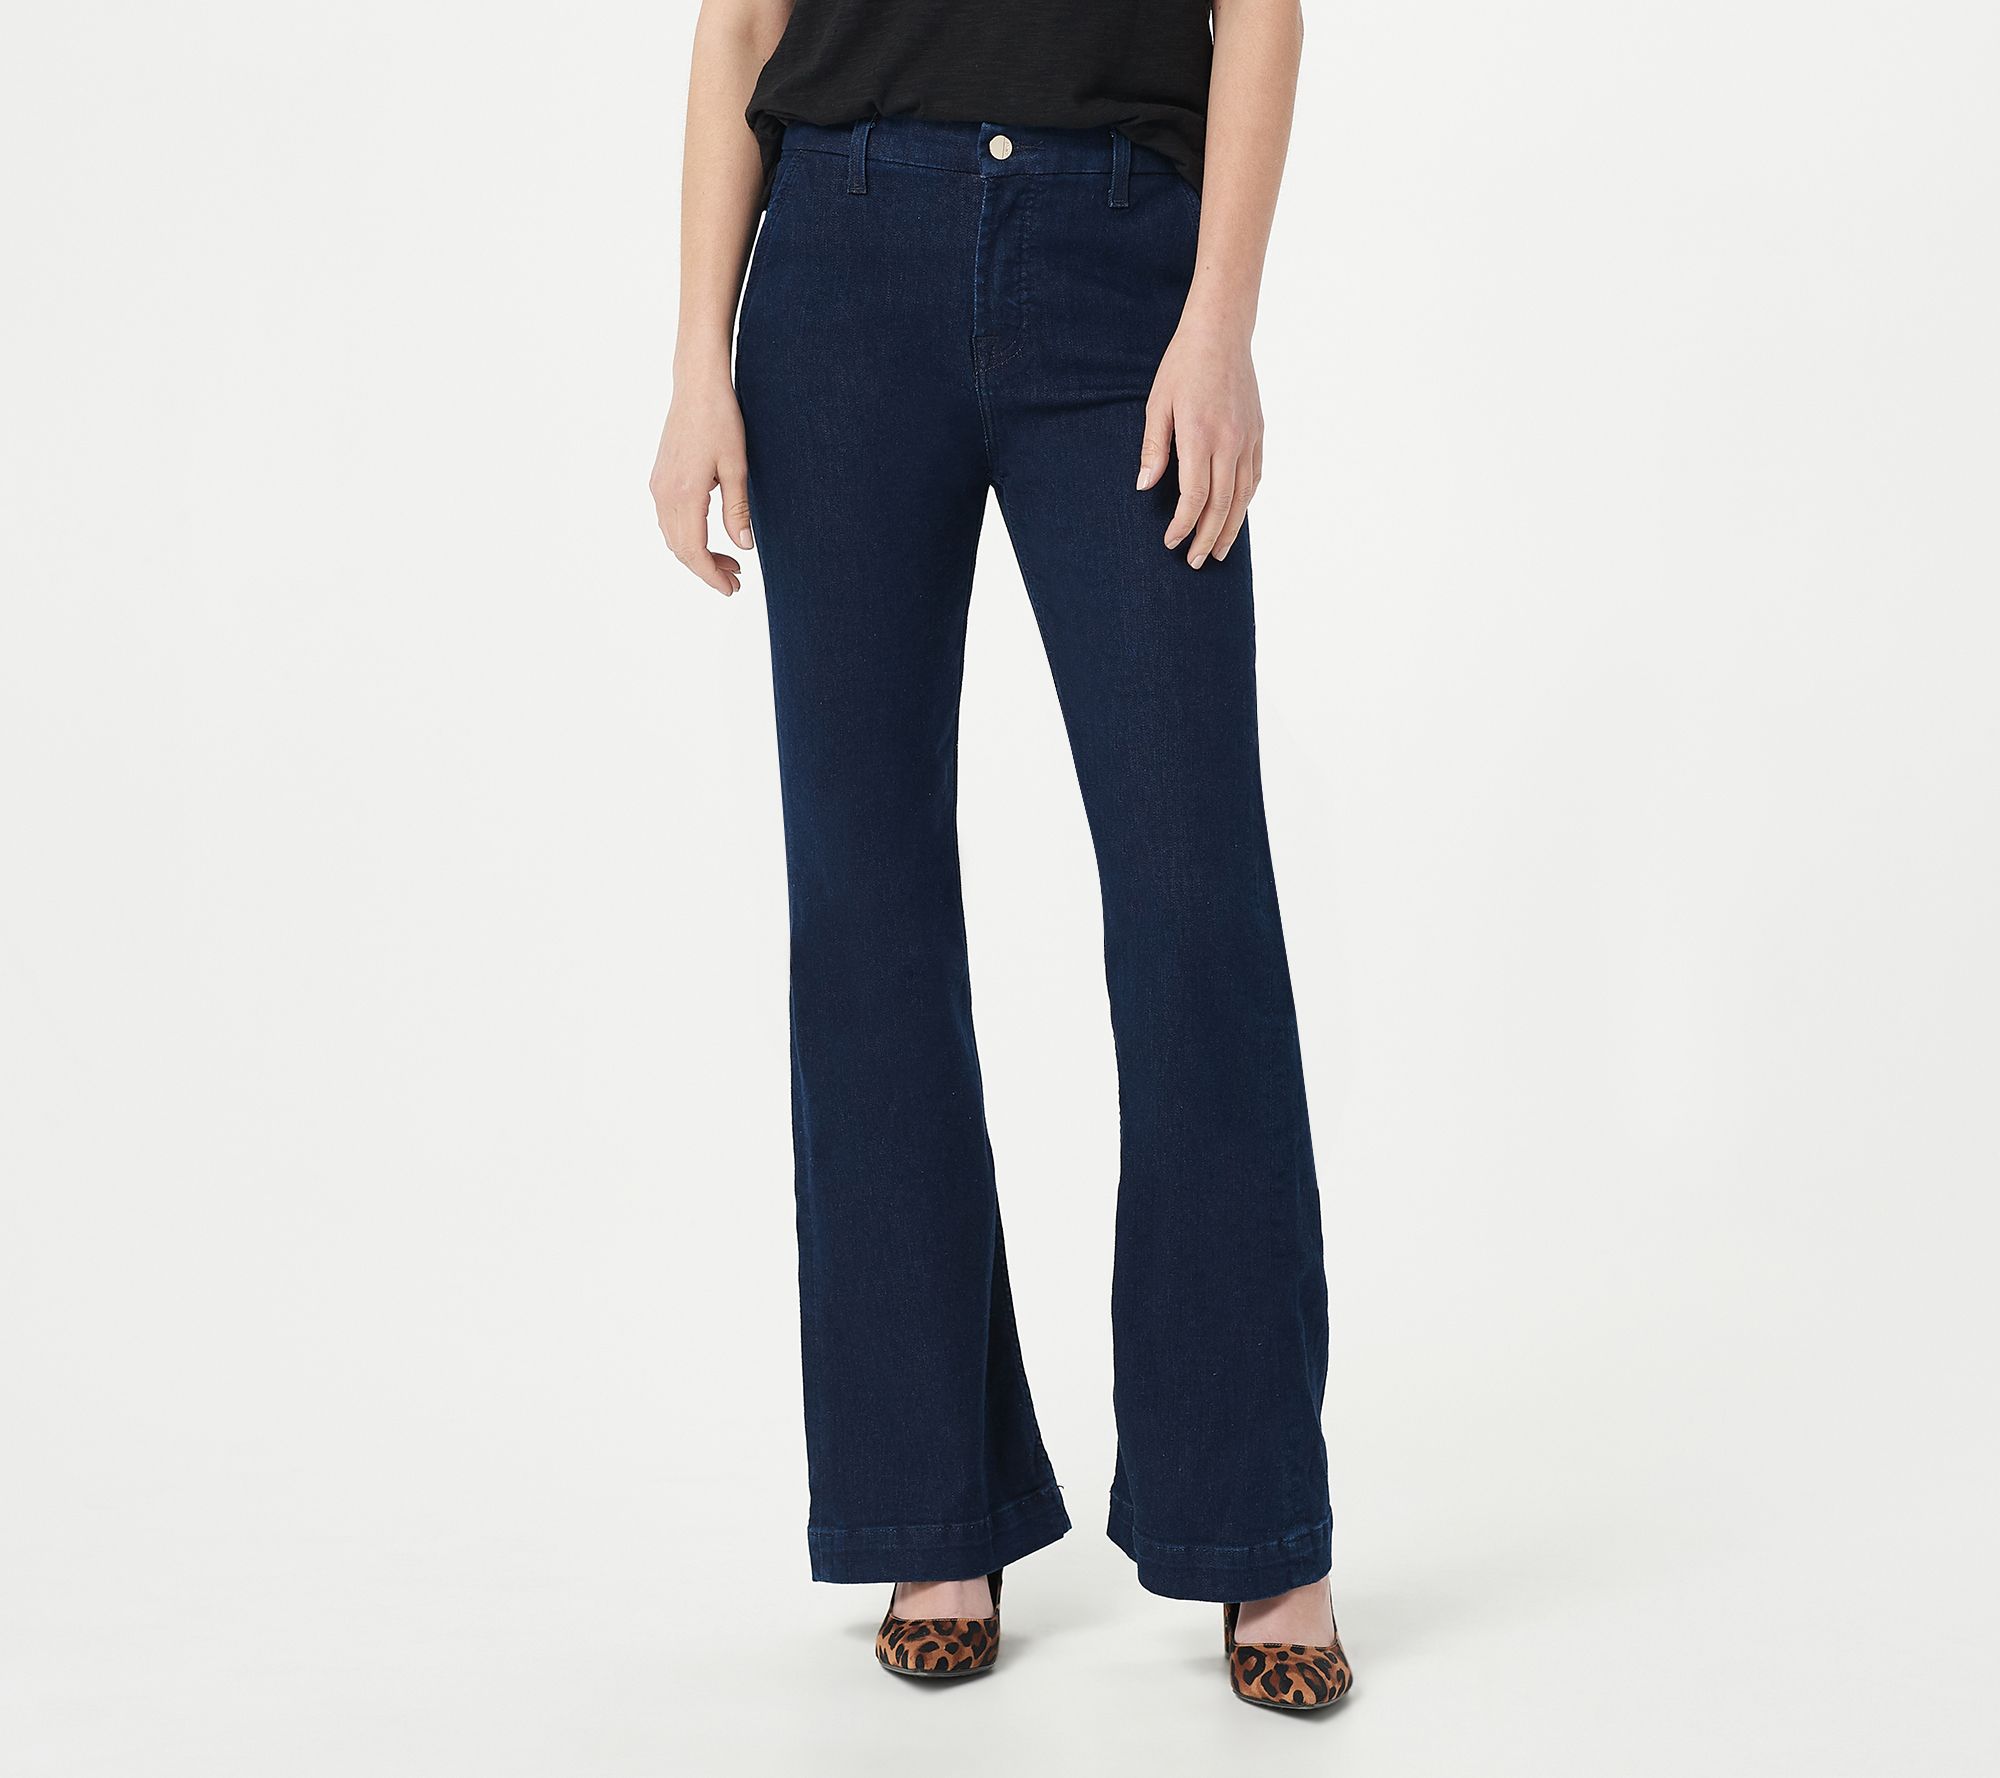 7 for all mankind trouser jeans